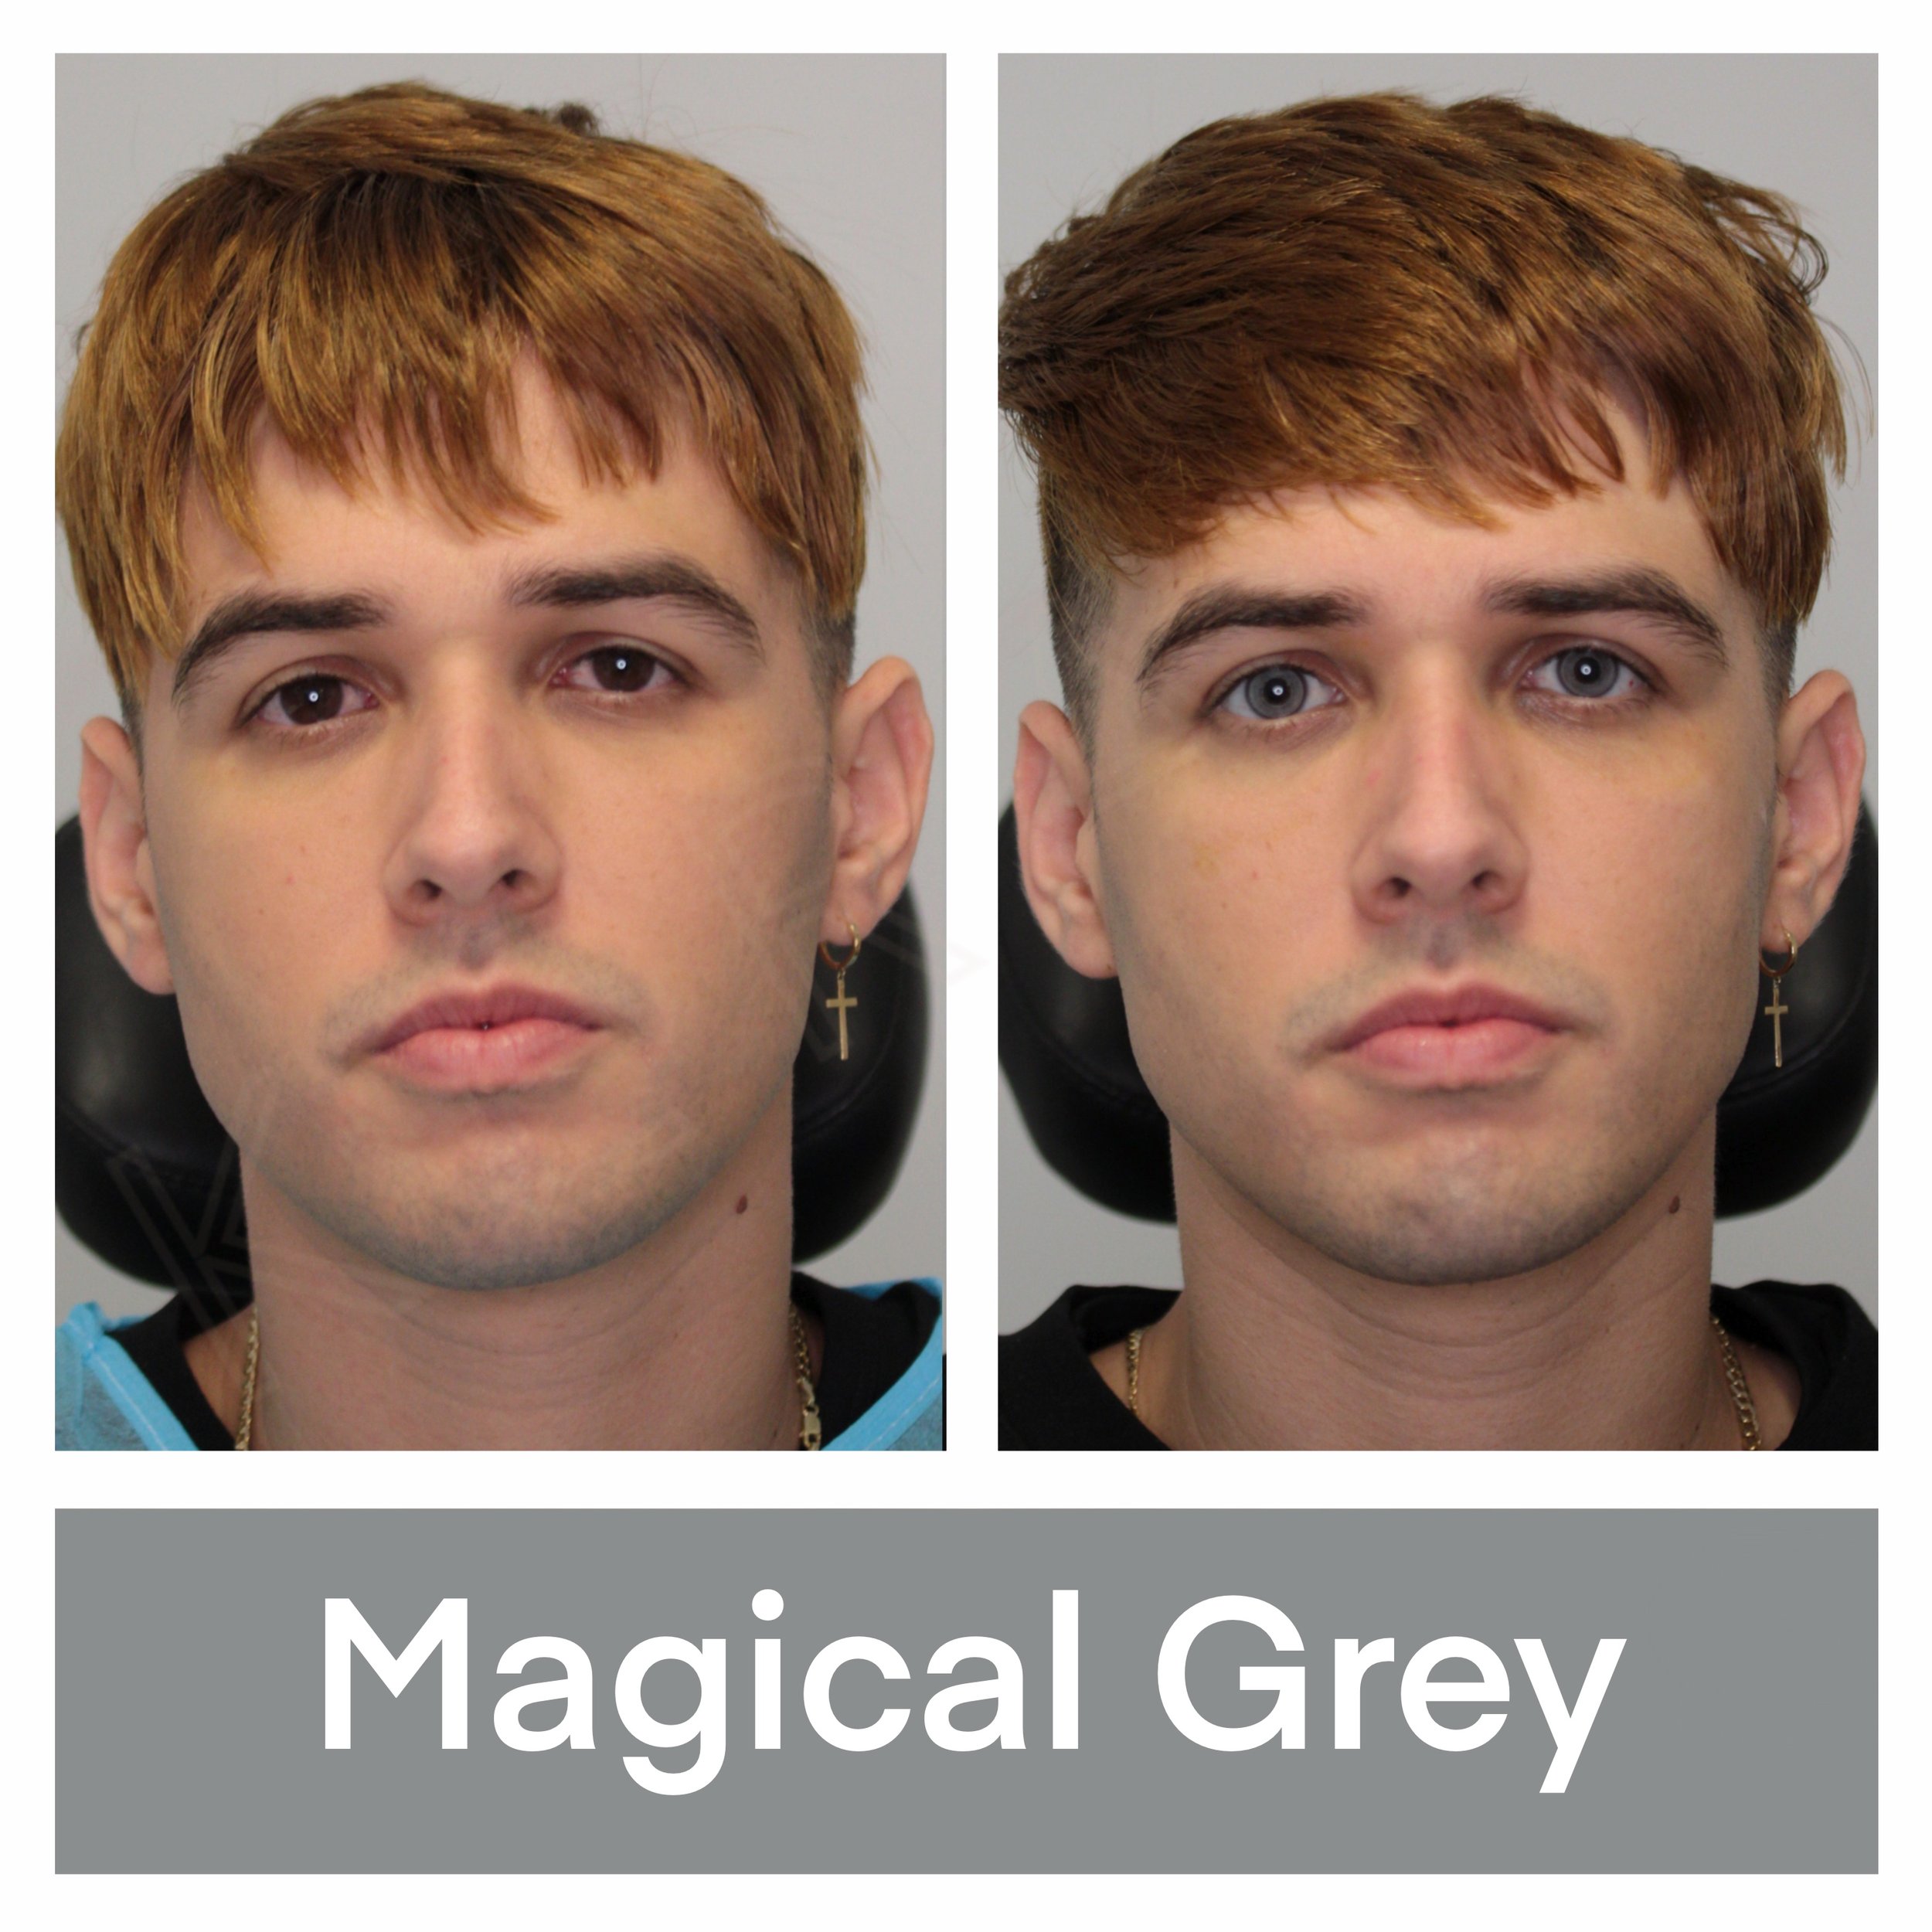 Eye Color Change with Magical Grey Pitgment at KERATO